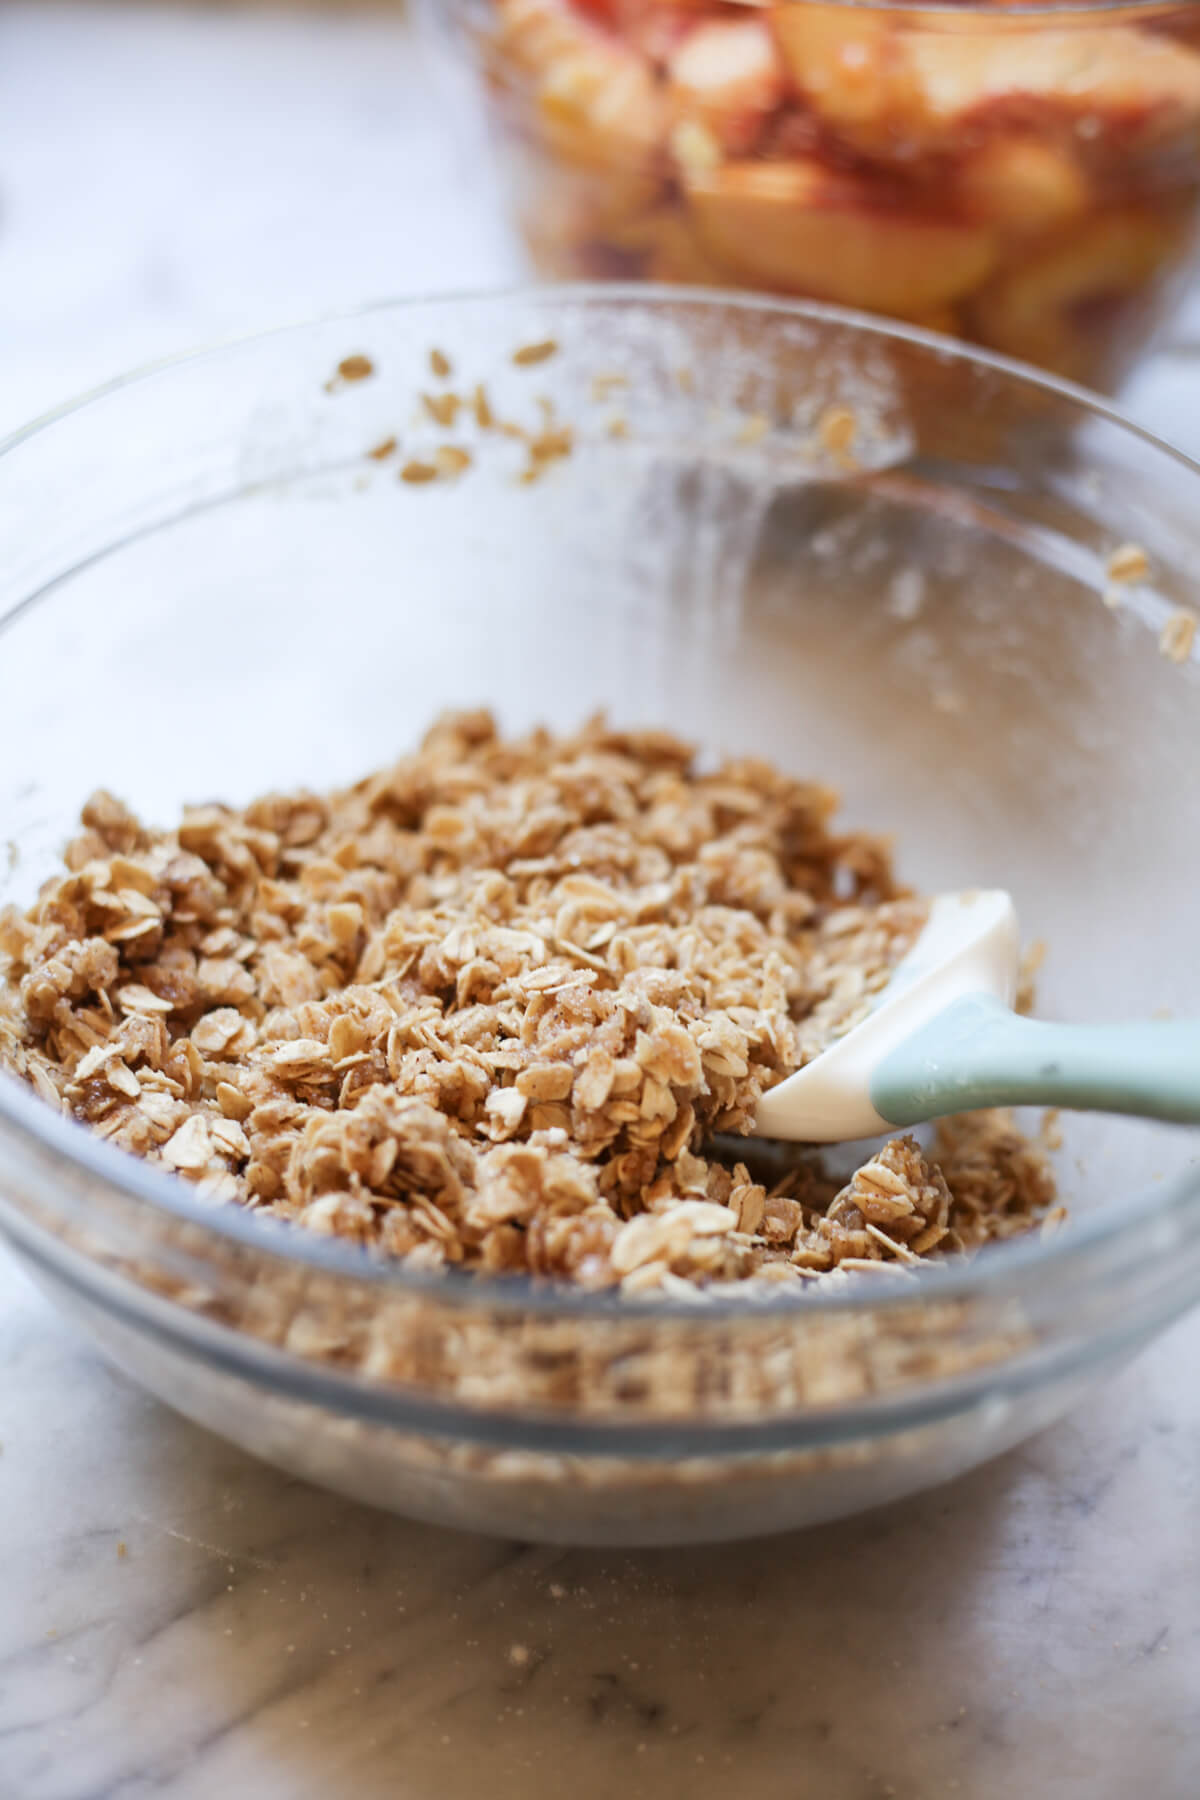 Oat crumble topping is mixed together with a rubber spatula in a glass bowl.